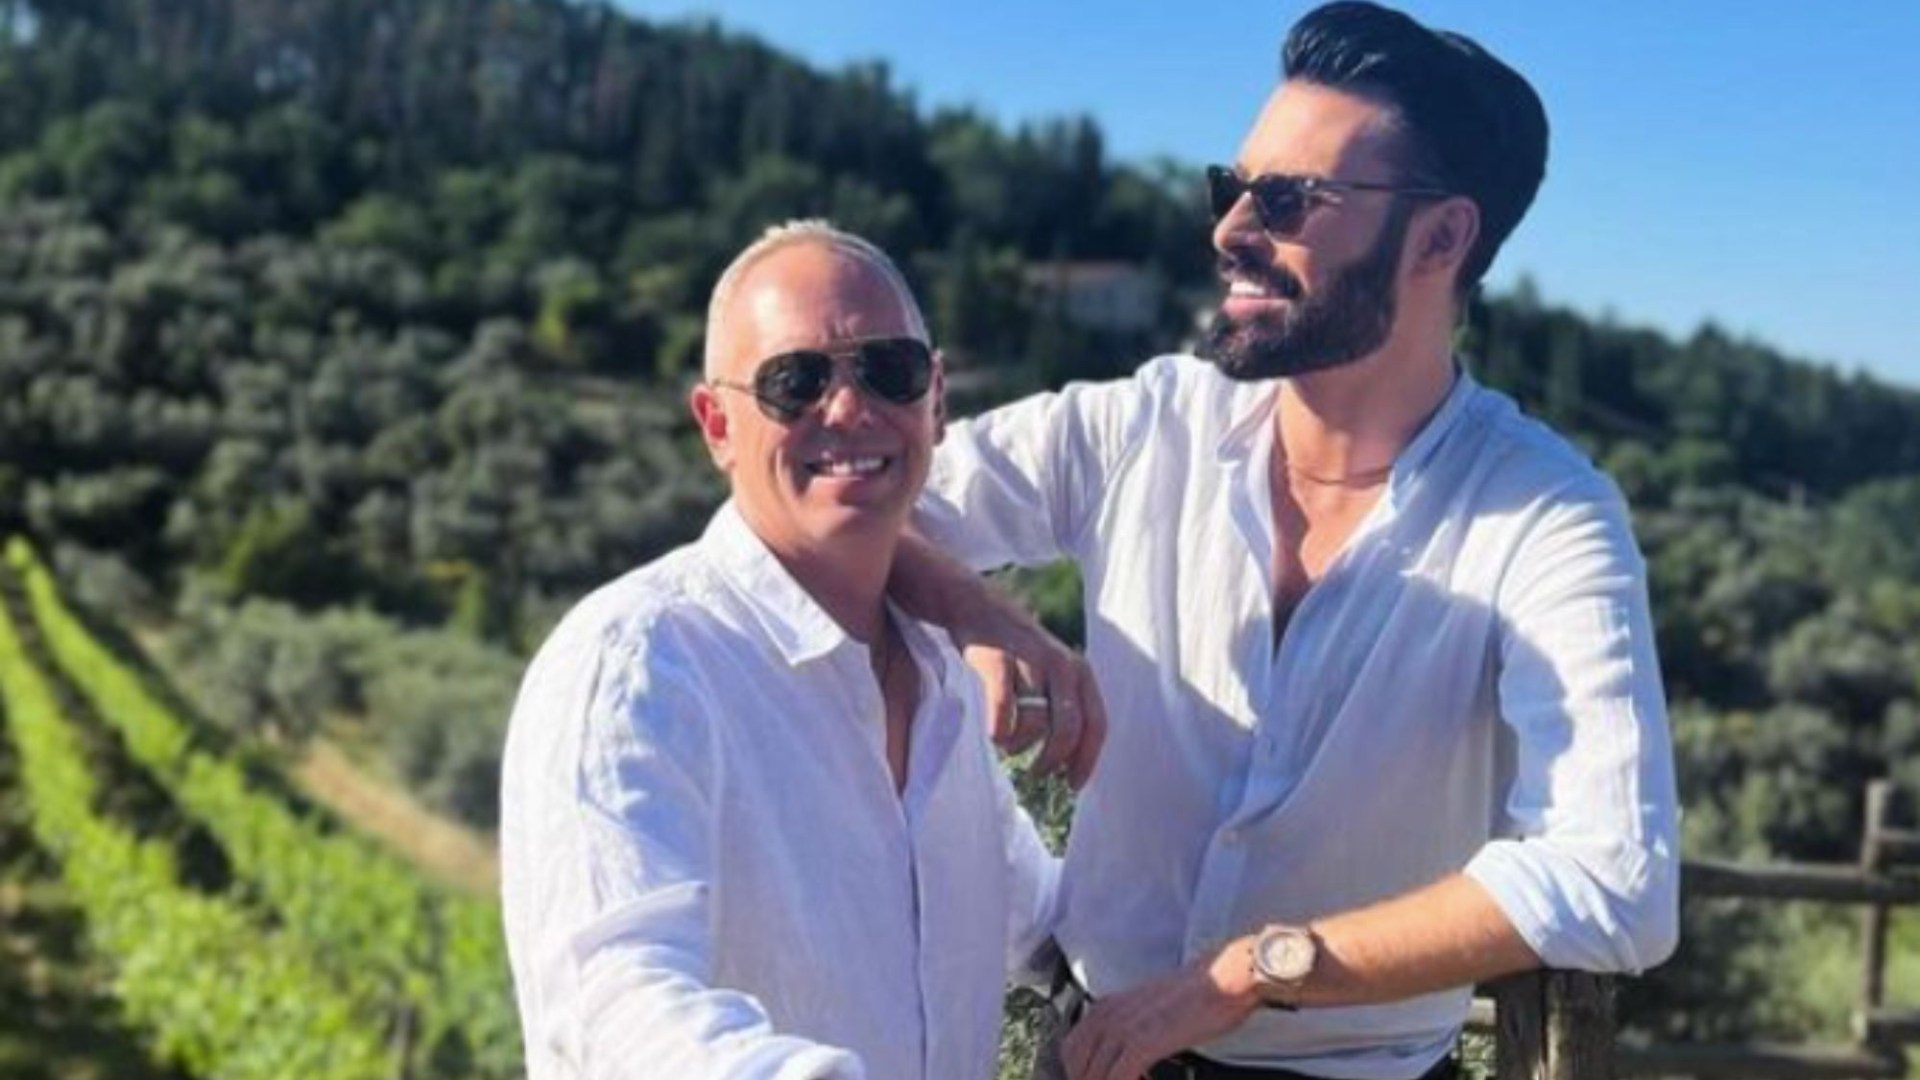 Rob Rinder sparks speculation he’s secretly dating Rylan as they promote new TV show [Video]